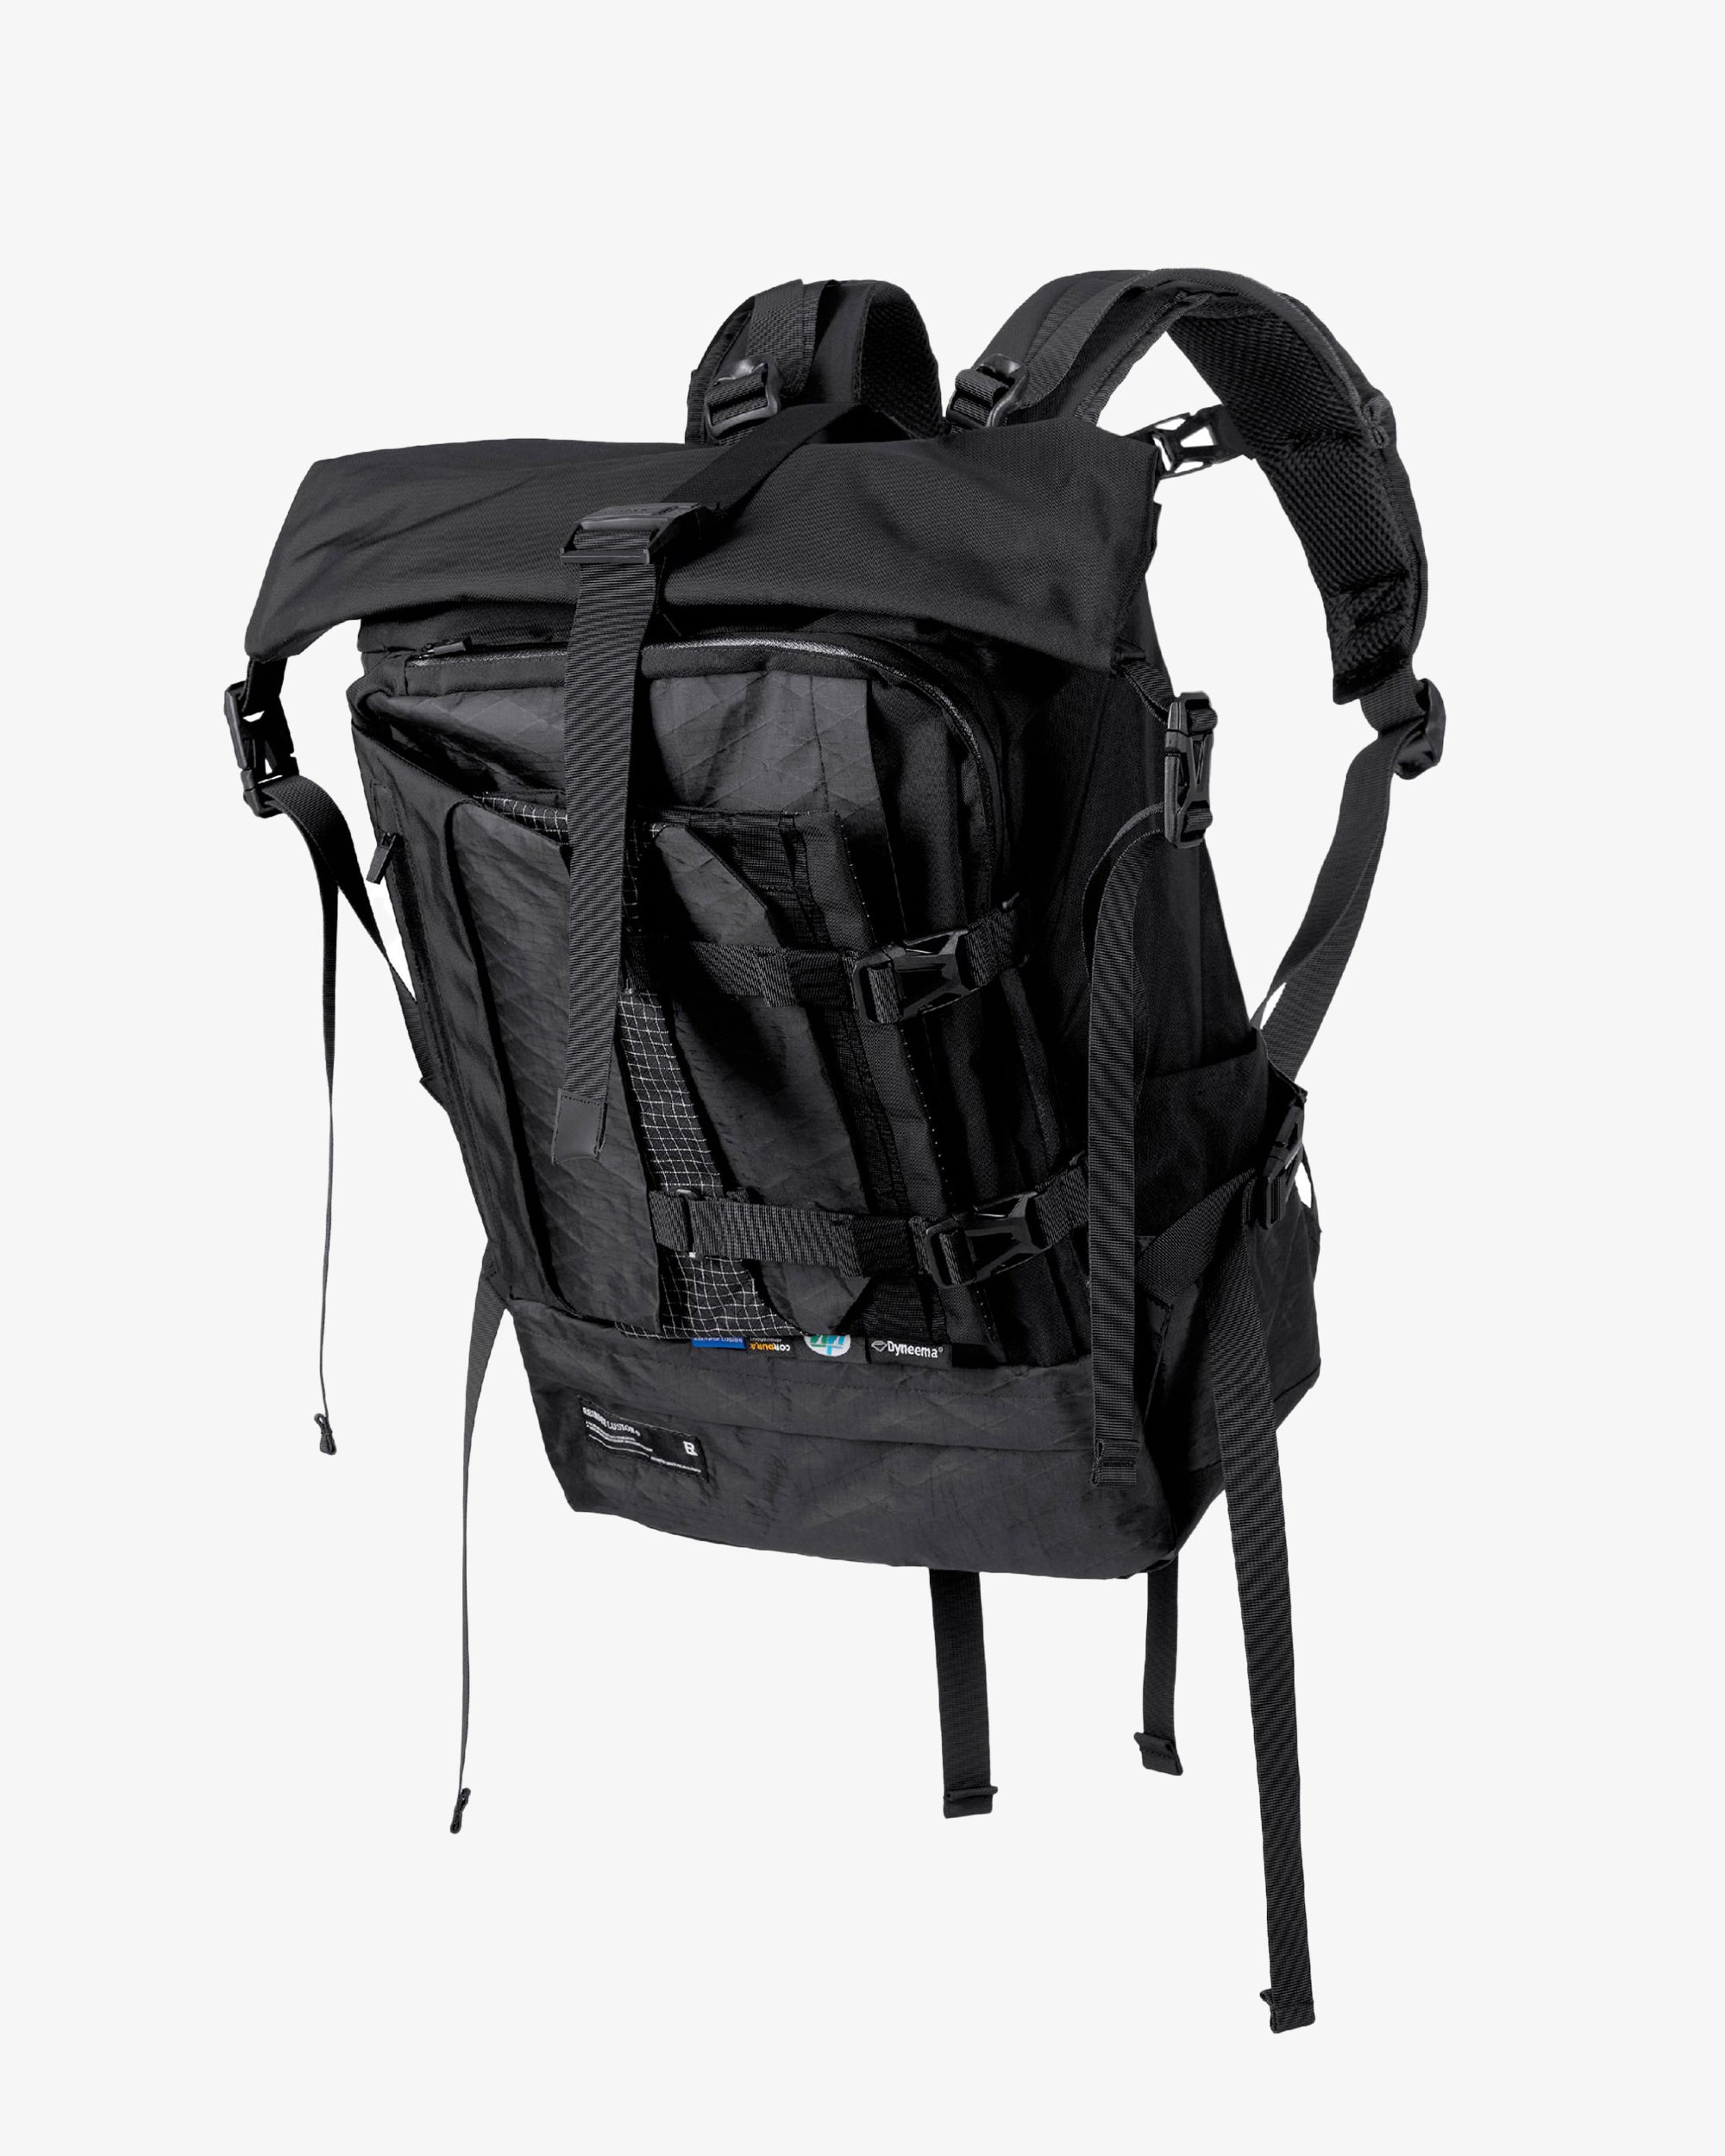 2-in-1 Ultimate Modular Expanding Backpack 2.0